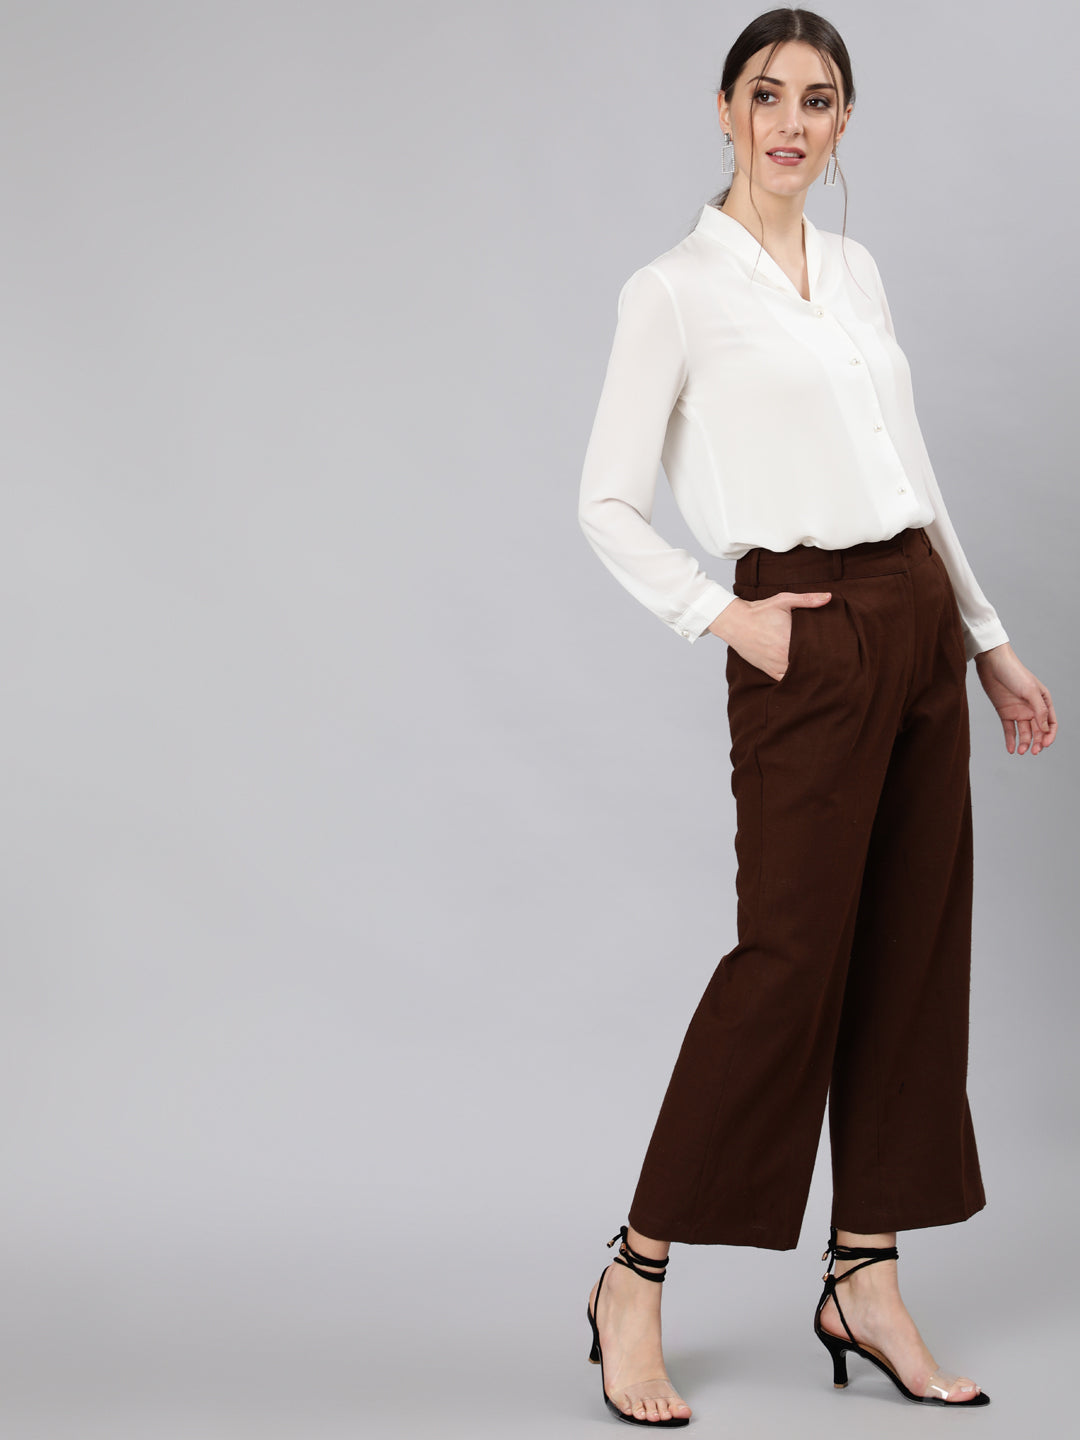 Women's White Layered Parallel Trousers - BitterLime | Trousers, Skirts  online, White layers